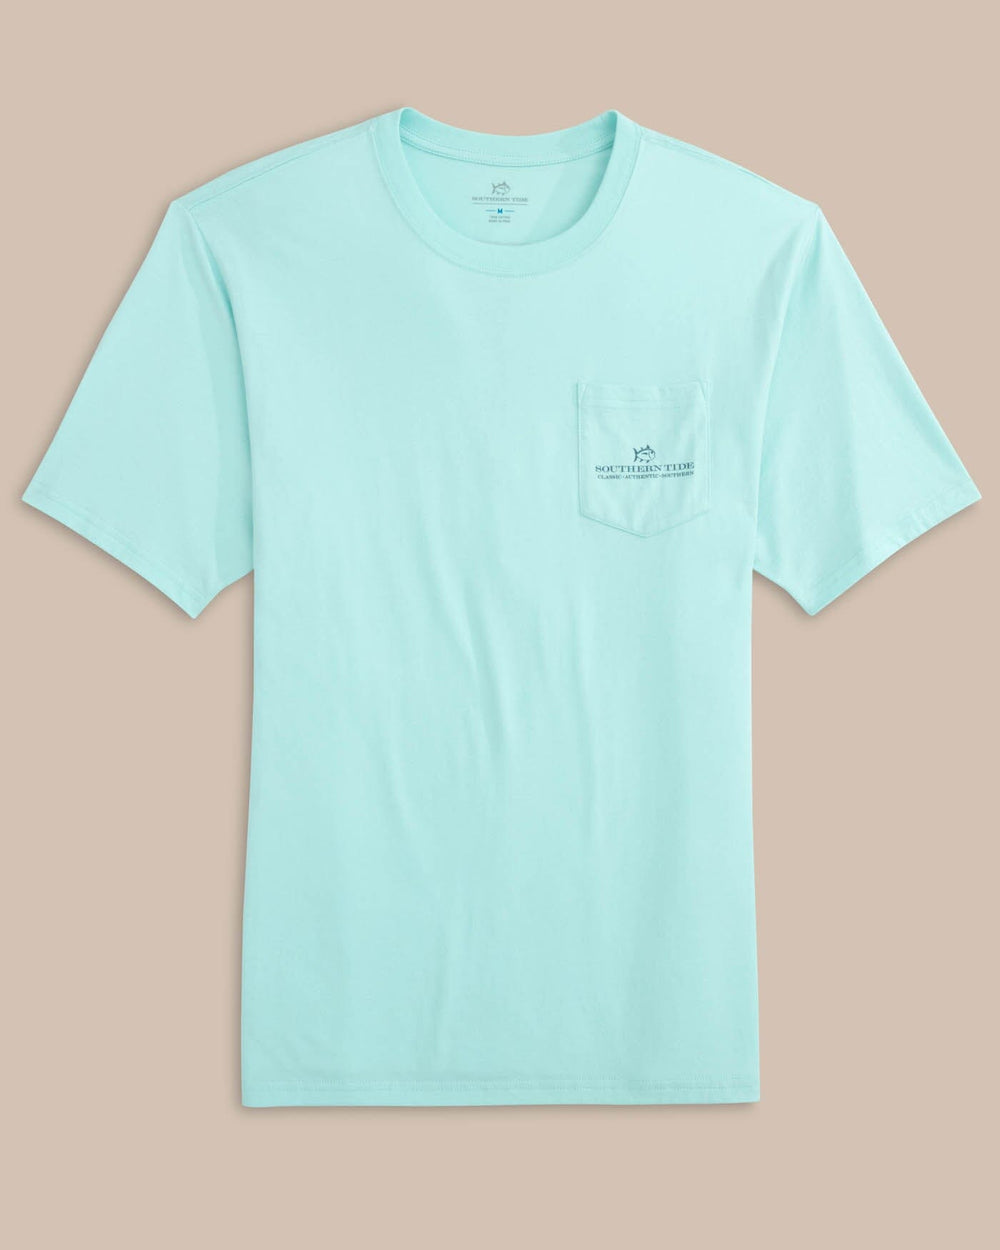 The front view of the Southern Tide ST Tradition Short Sleeve T-Shirt by Southern Tide - Wake Blue